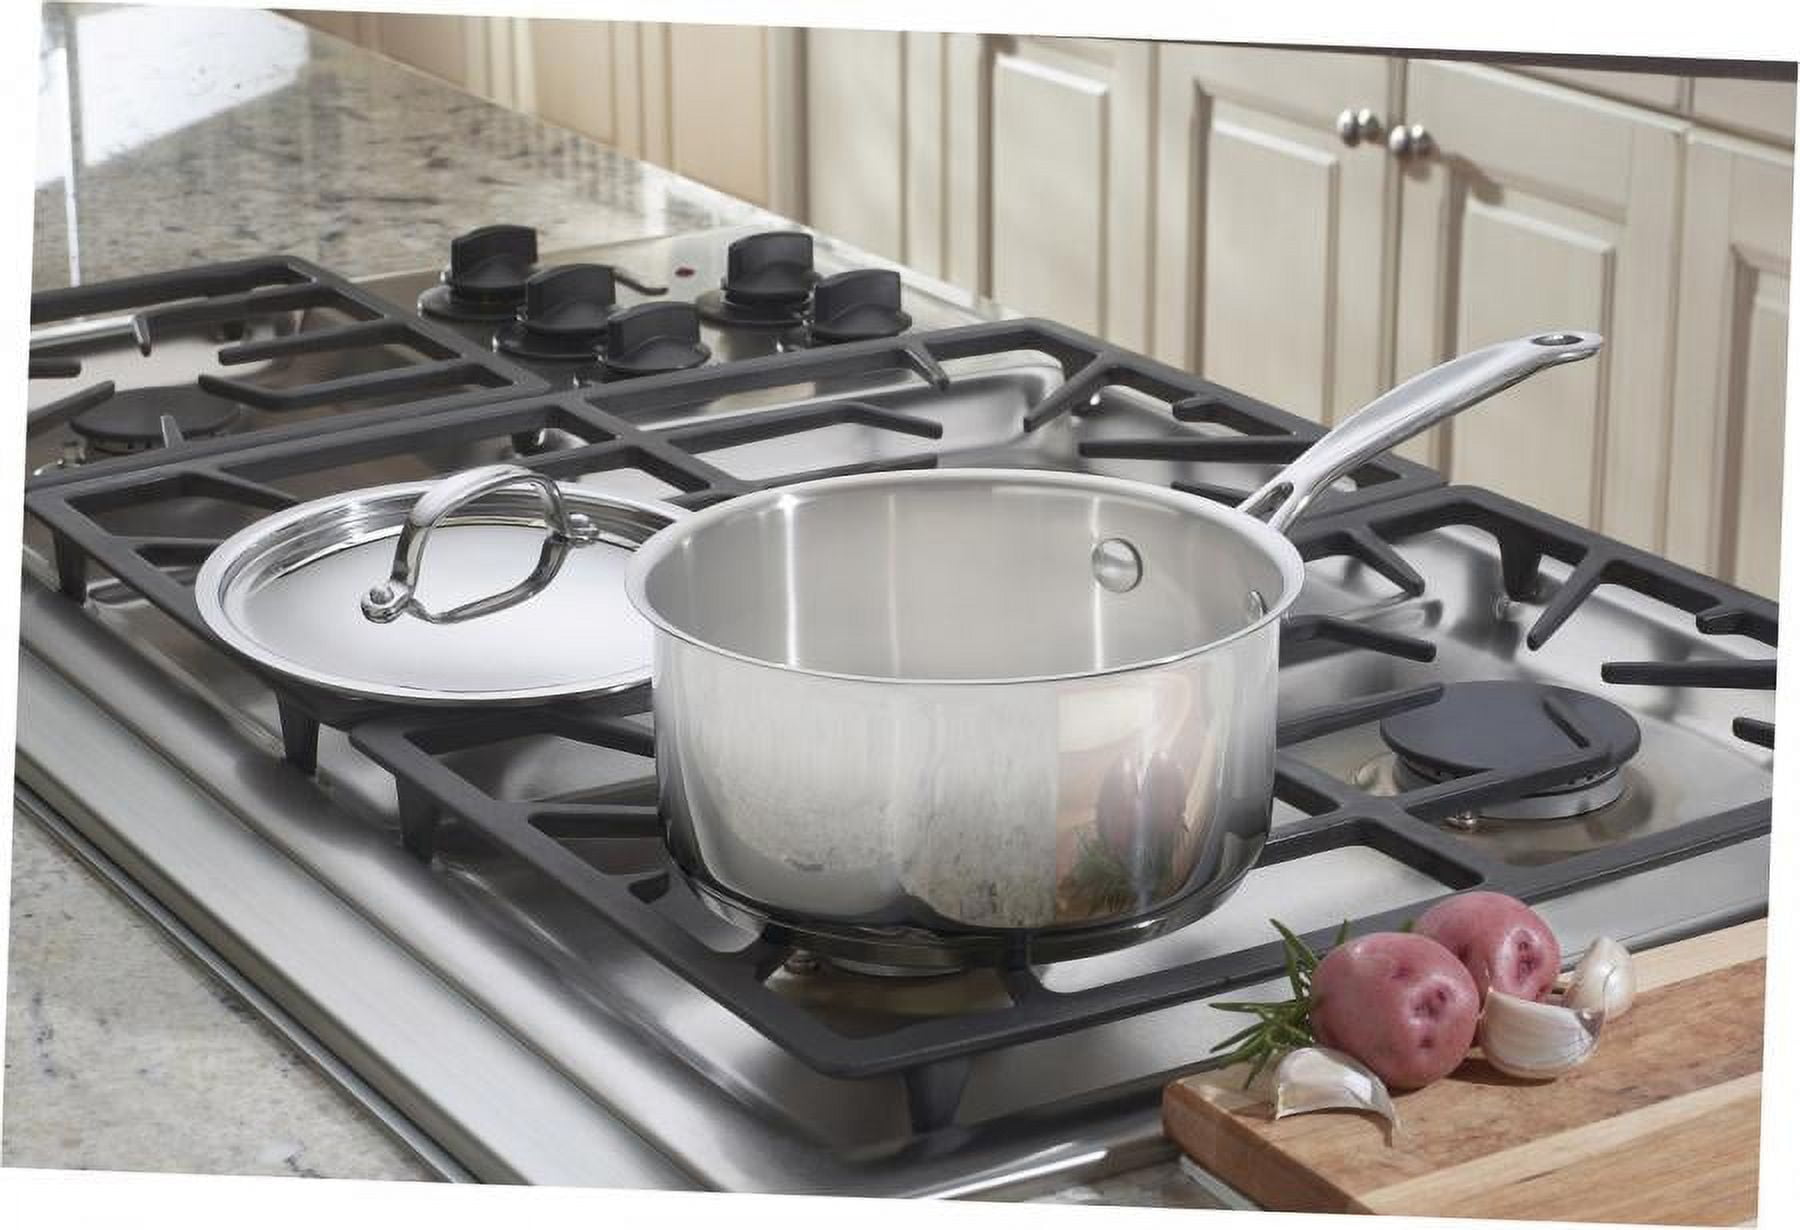 Cuisinart Chef's Classic Stainless 3-quart Cook and Pour Saucepan